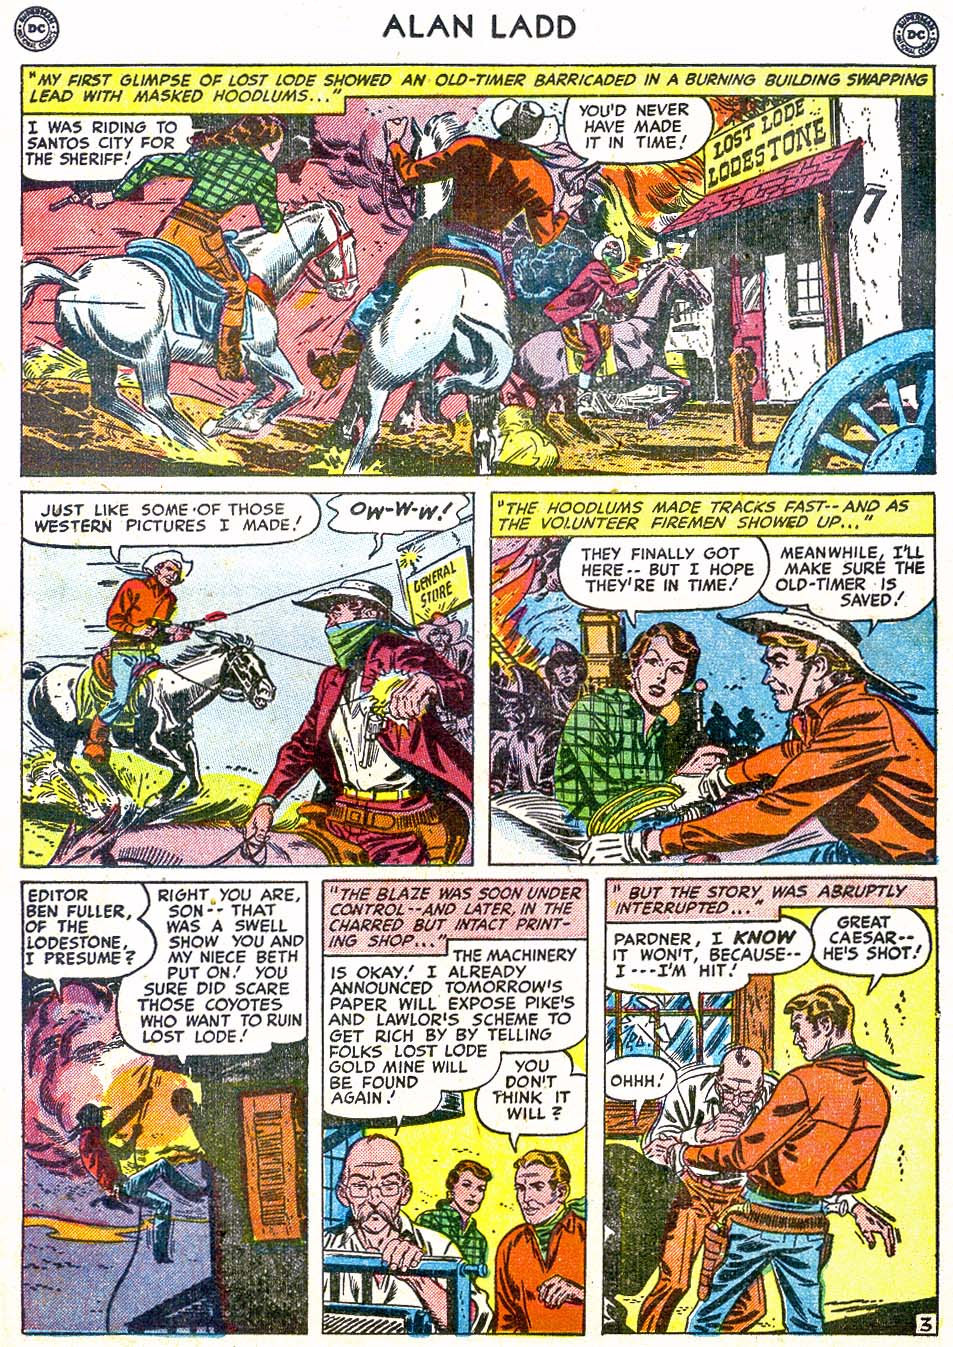 Read online Adventures of Alan Ladd comic -  Issue #6 - 23